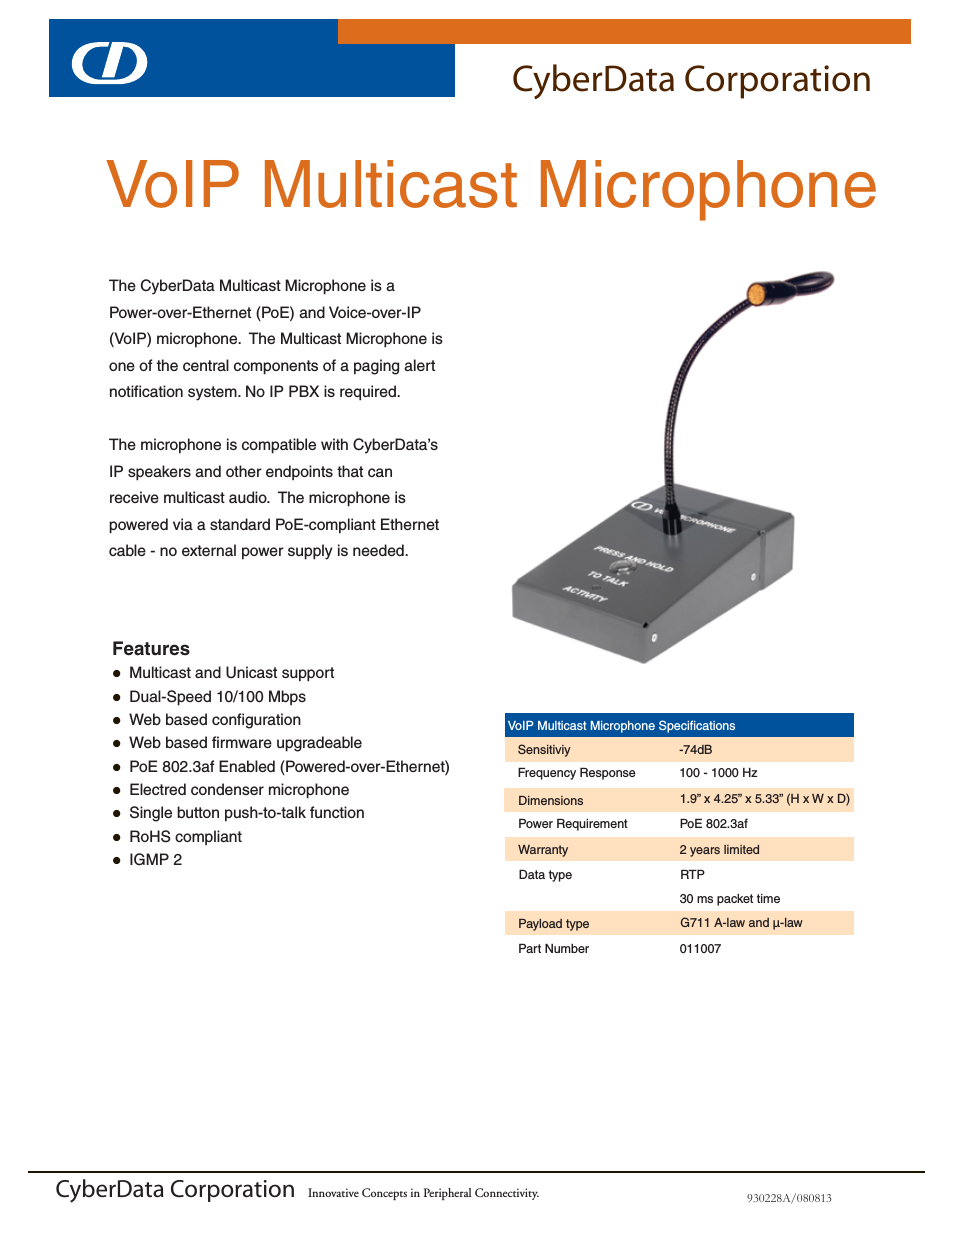 VoIP Multicast Microphone